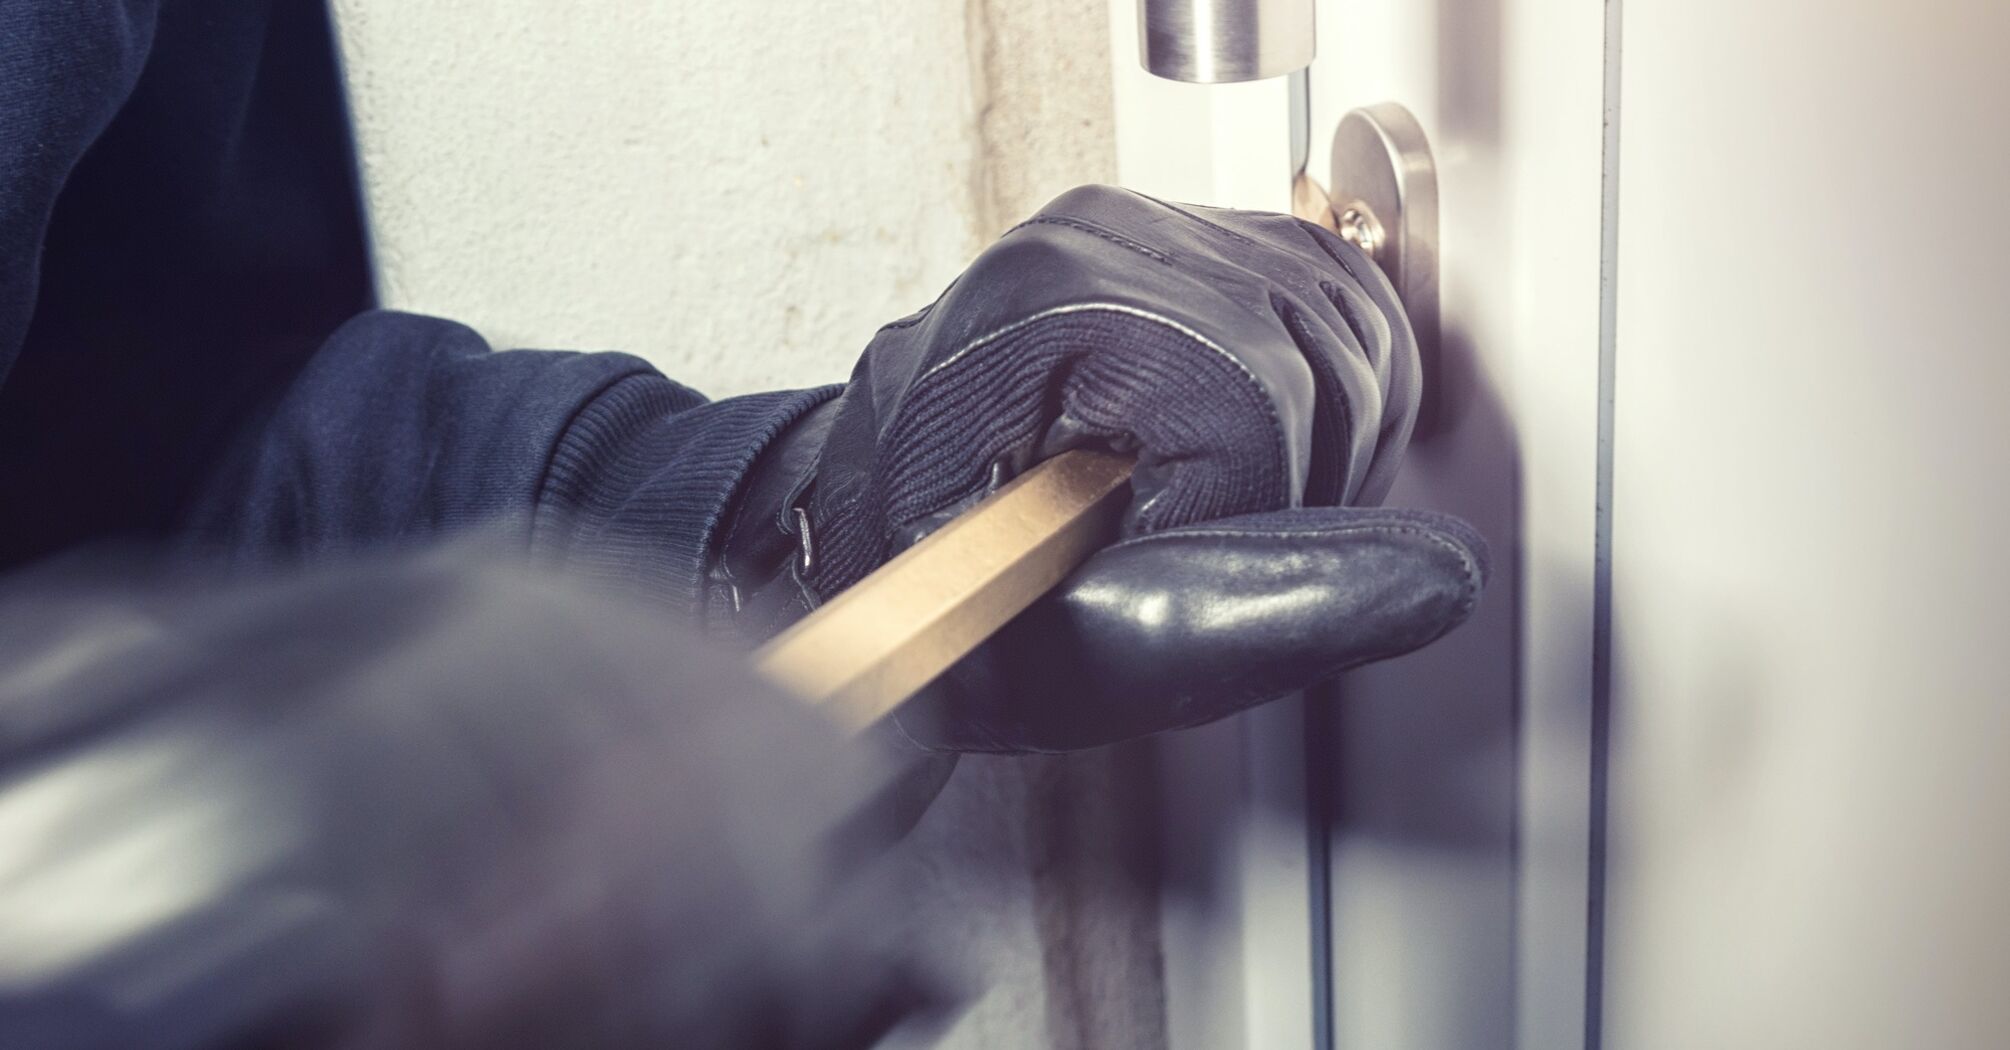 Practical tips for home security